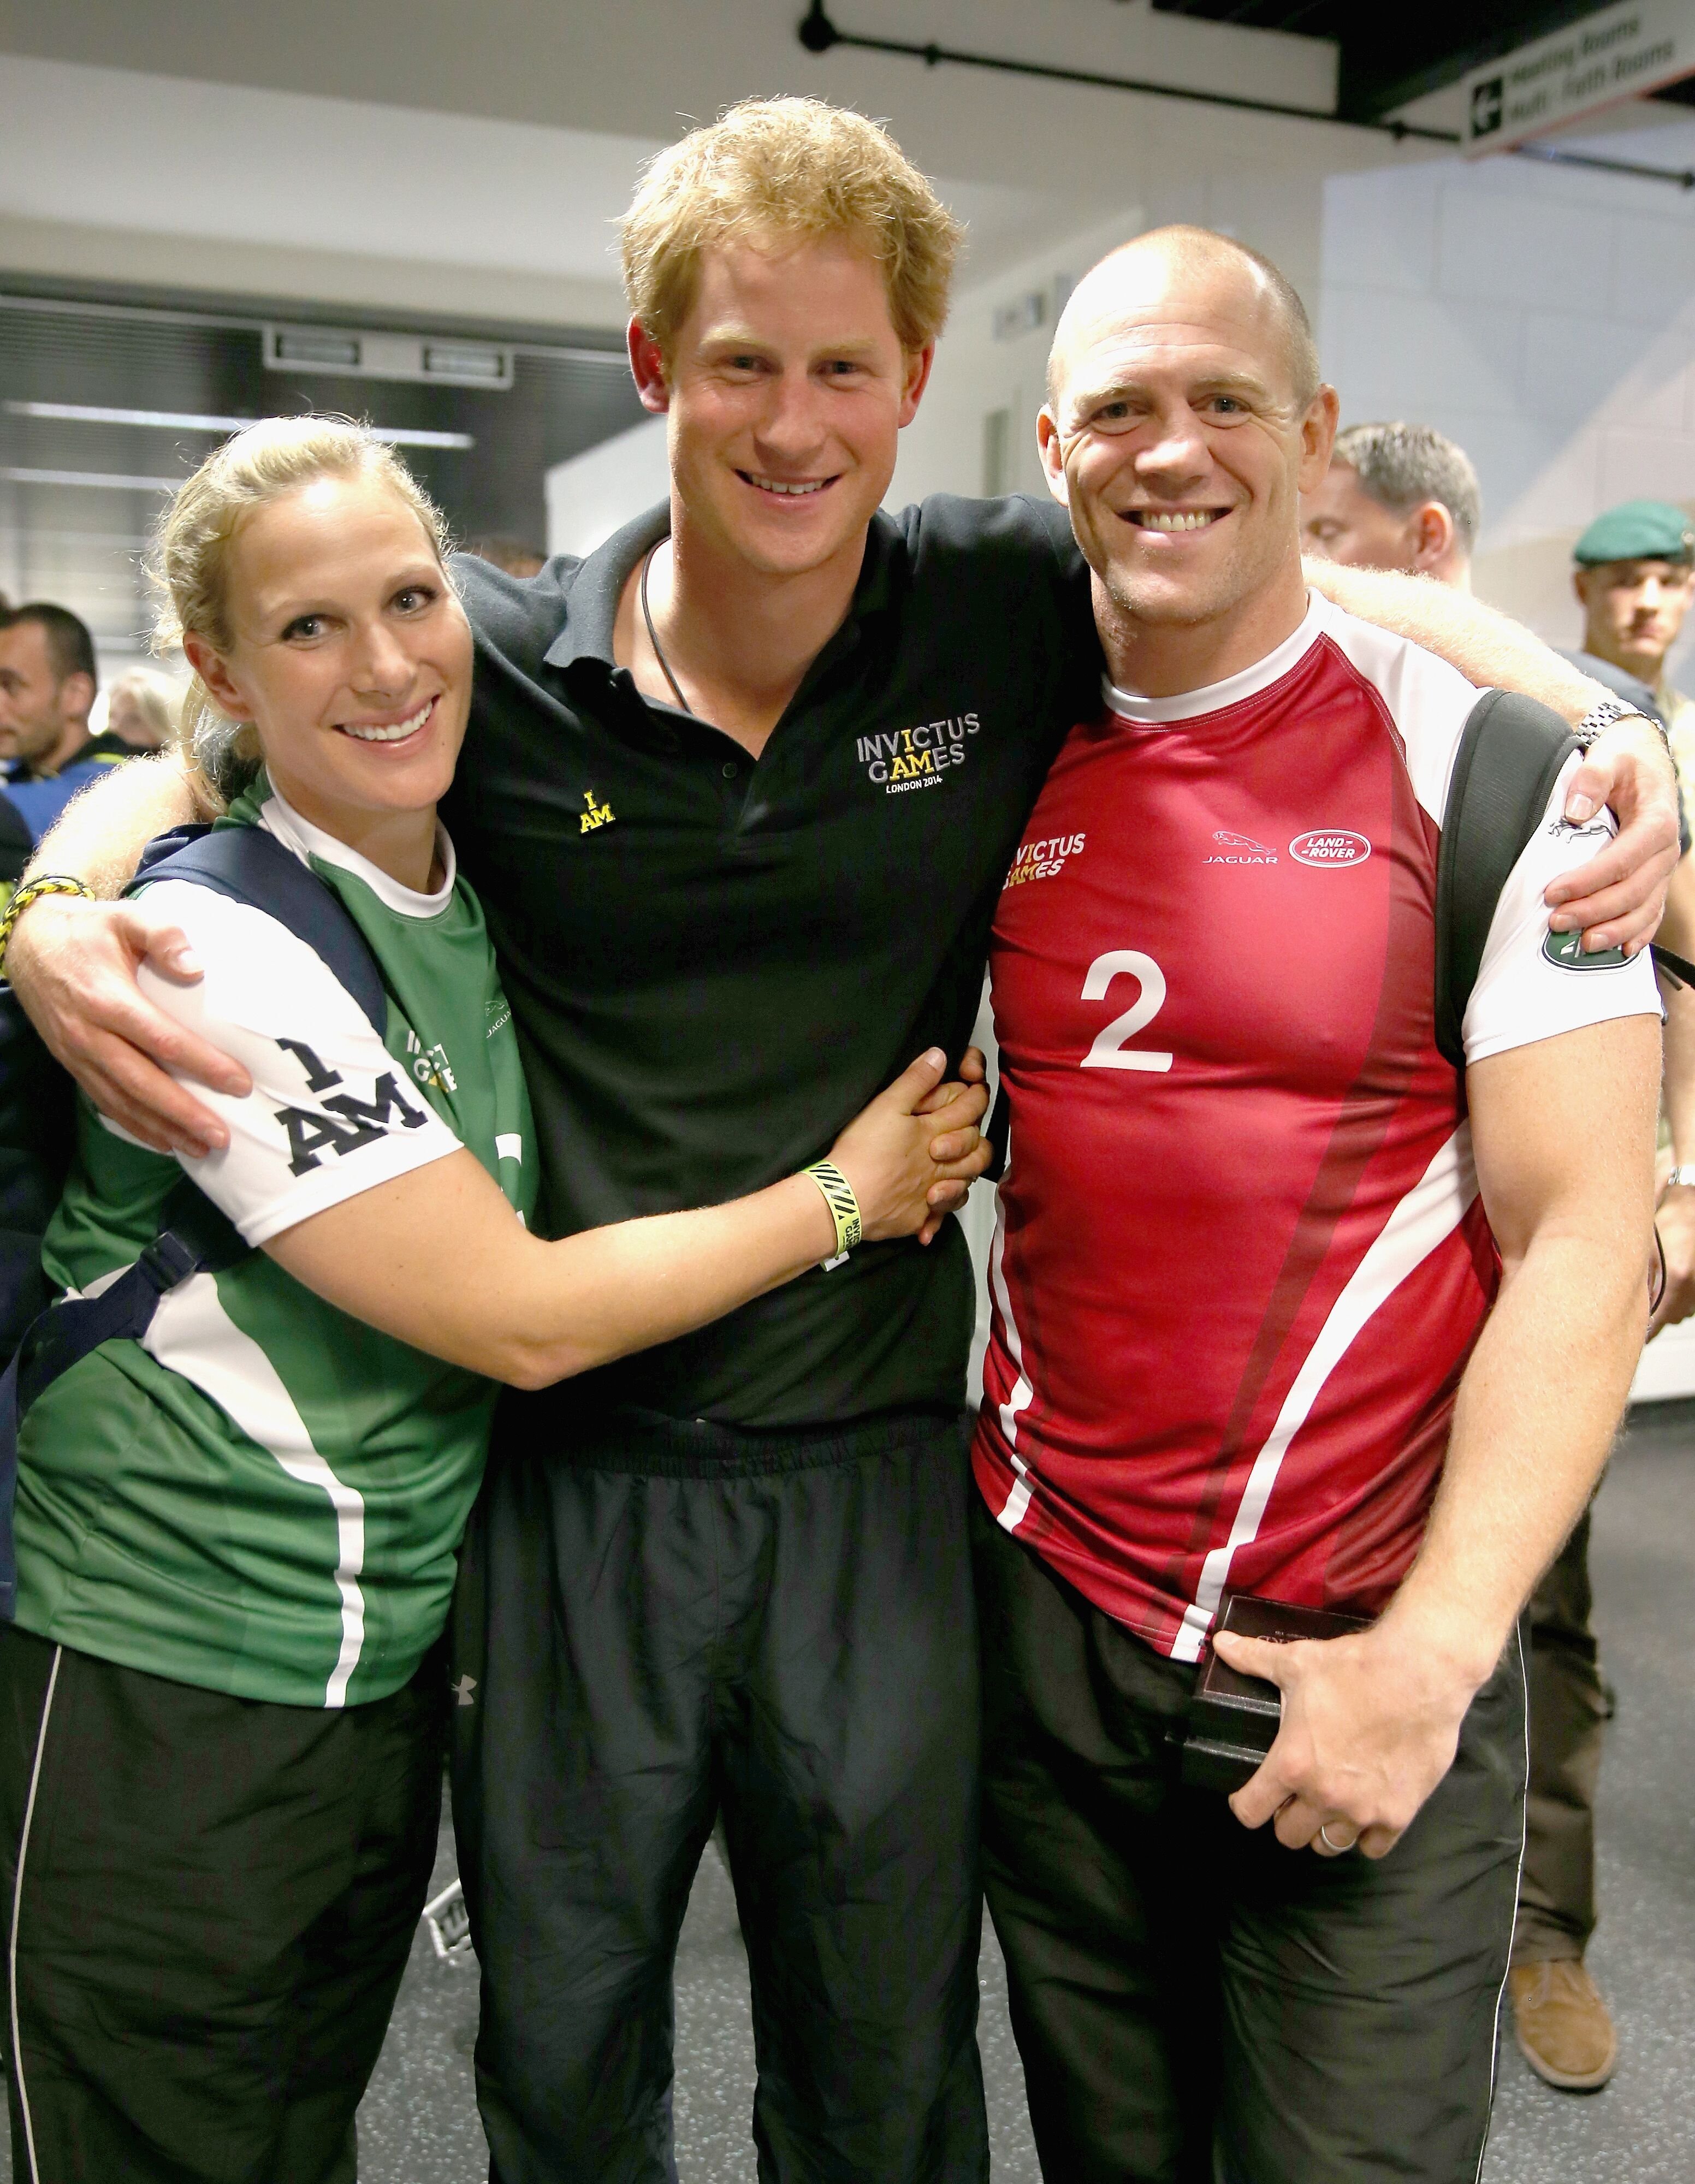 Zara Phillips, Prince Harry and Mike Tindall pose for a photograph after competing in an Exhibition wheelchair rugby match at the Copper Box. | Source: Getty Images